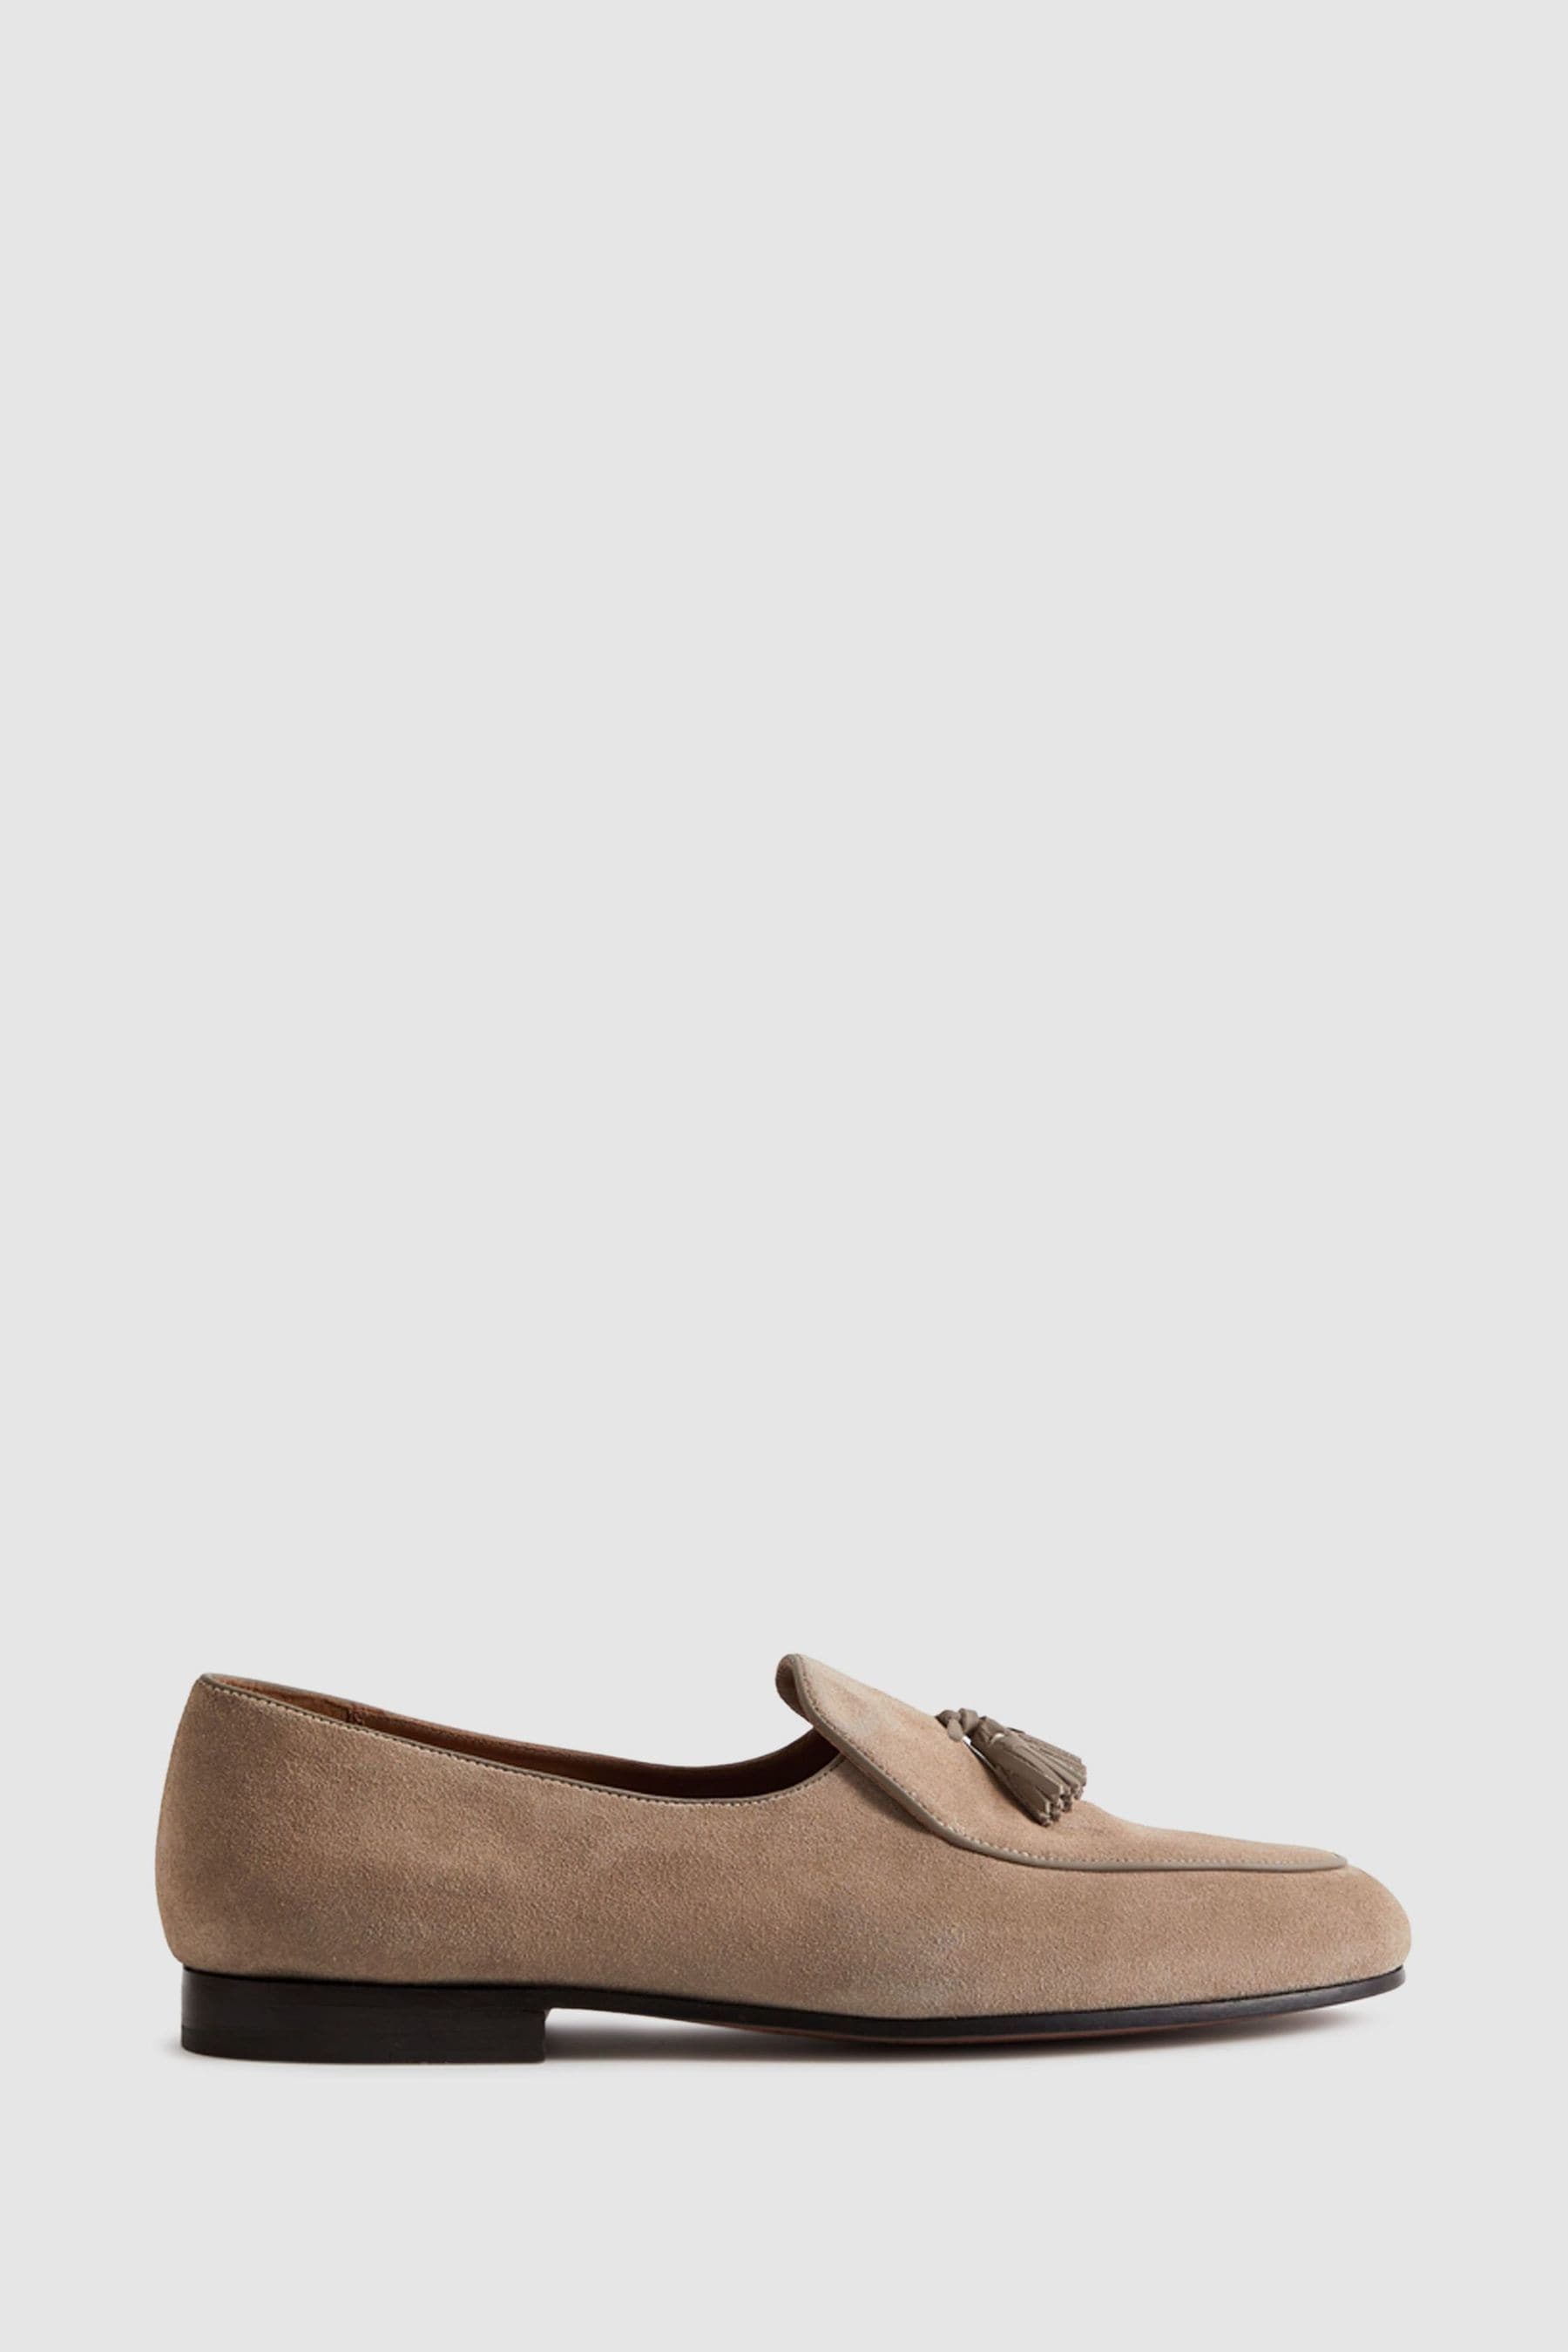 Harry - Taupe Suede Slip-On...